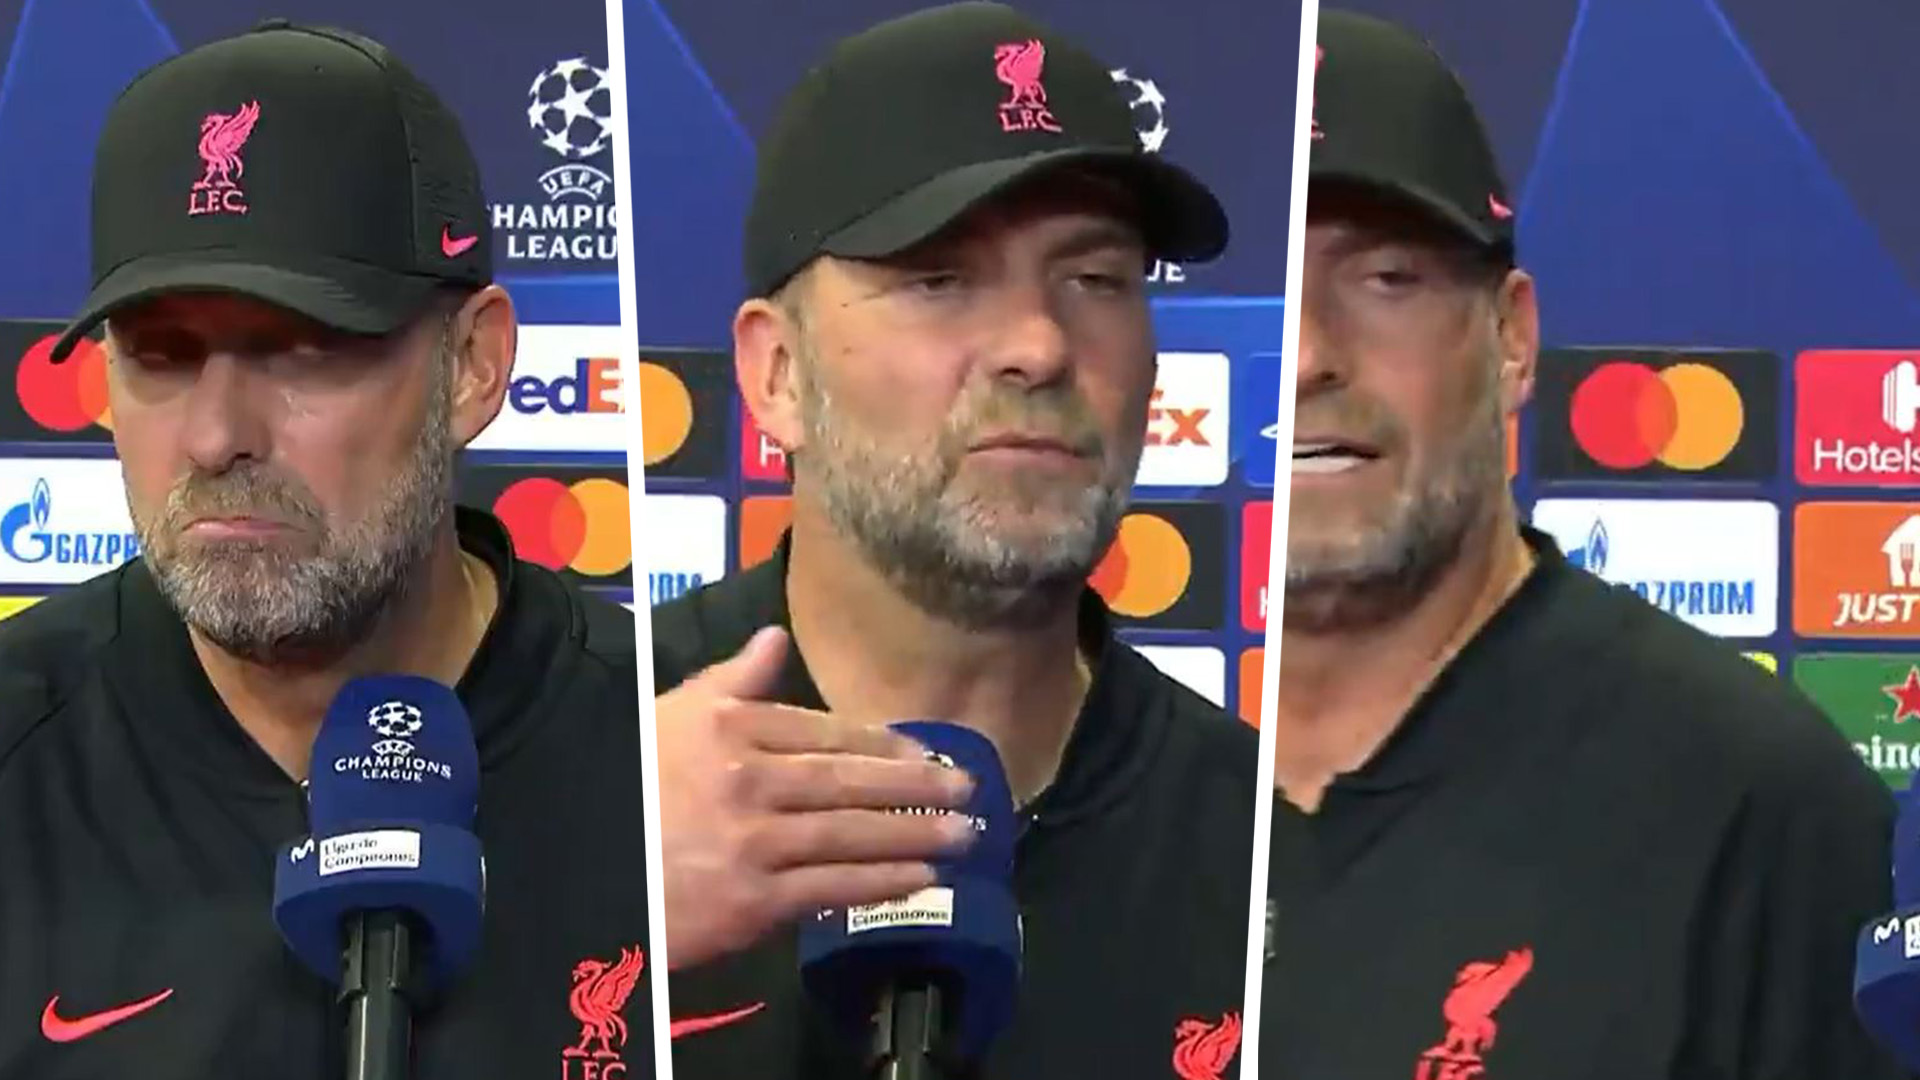 'You're not a nice person' - Watch Klopp cut interview short over Simeone handshake question as journalist laughs at Liverpool boss